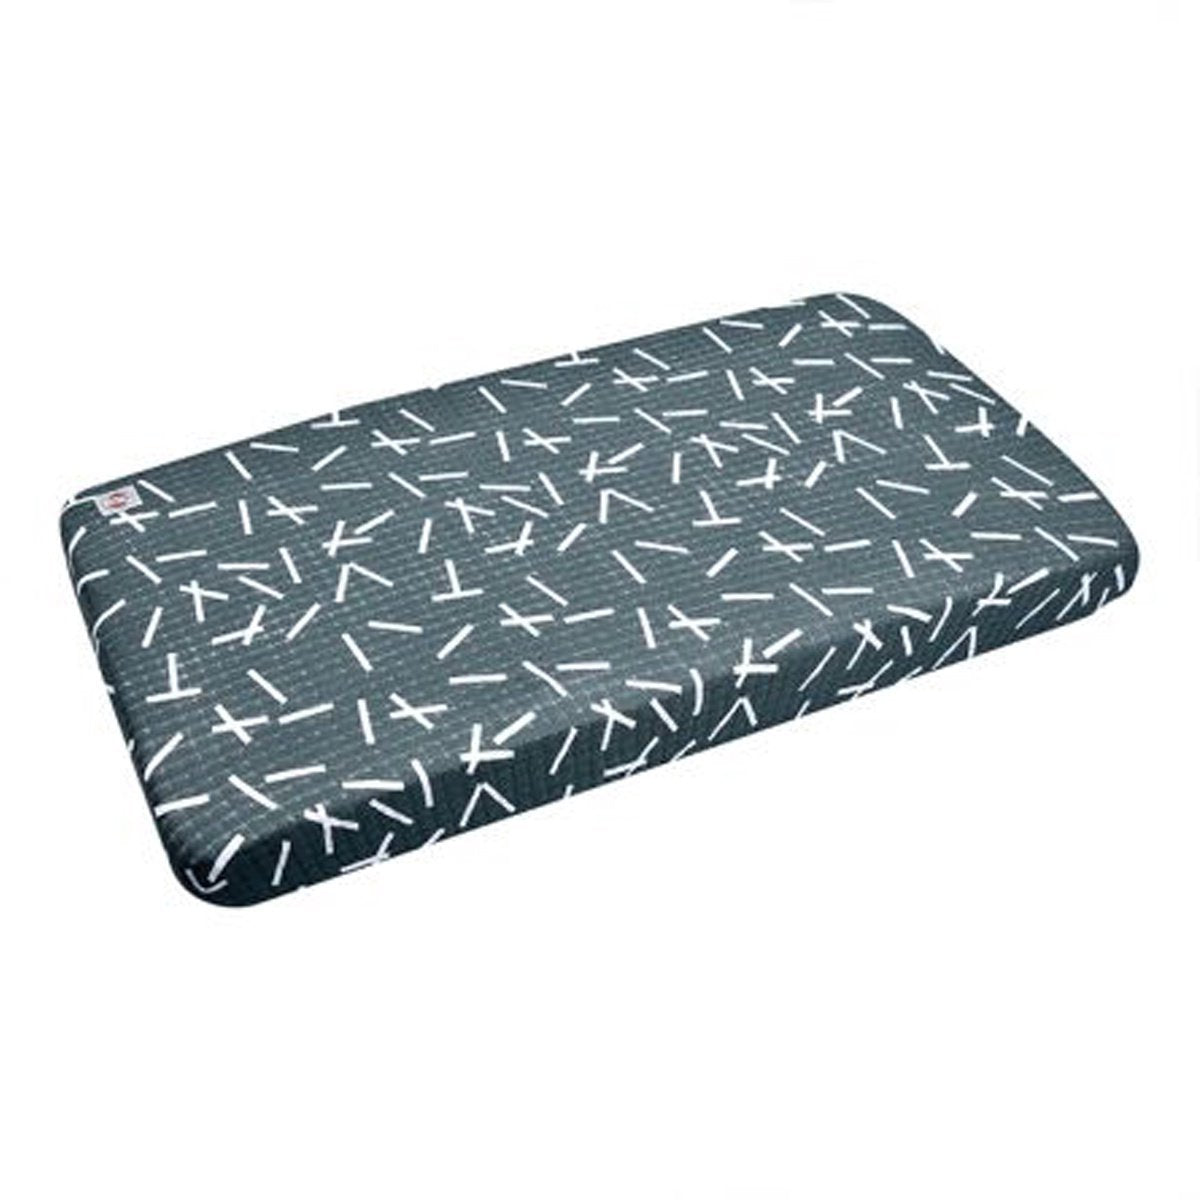 Deer Industries nursery bedding Lodger Slumber Carbon. Black and white monochrome Soft knitted cotton fitted sheet for cot or cot bed. Breathable, comfortable and absorbent baby bedding. 